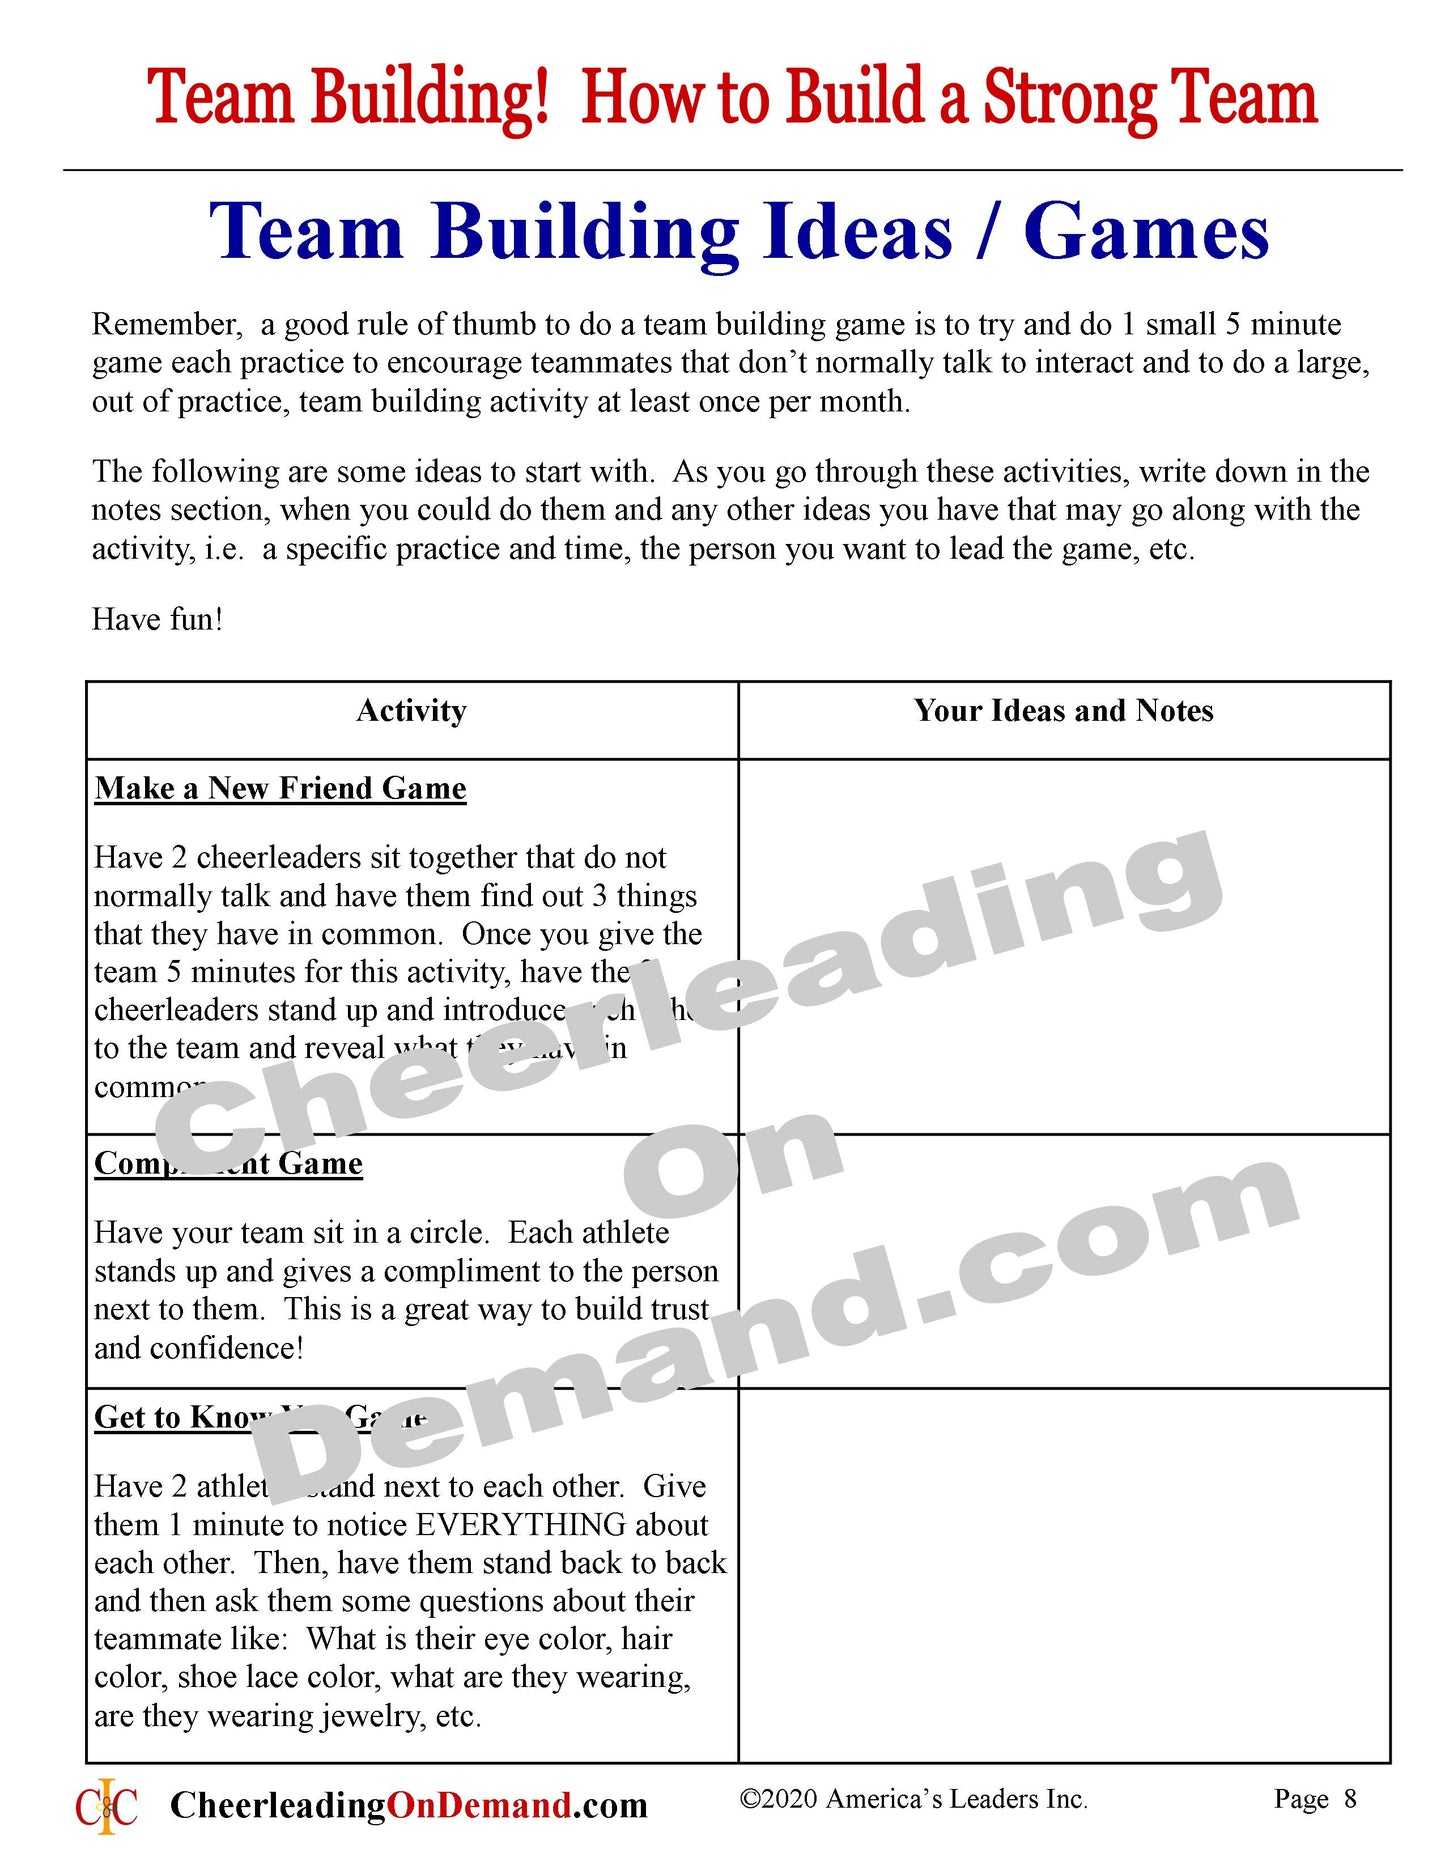 Cheerleading Team Building Ebook - How to Build a Strong Team - Cheer and Dance On Demand